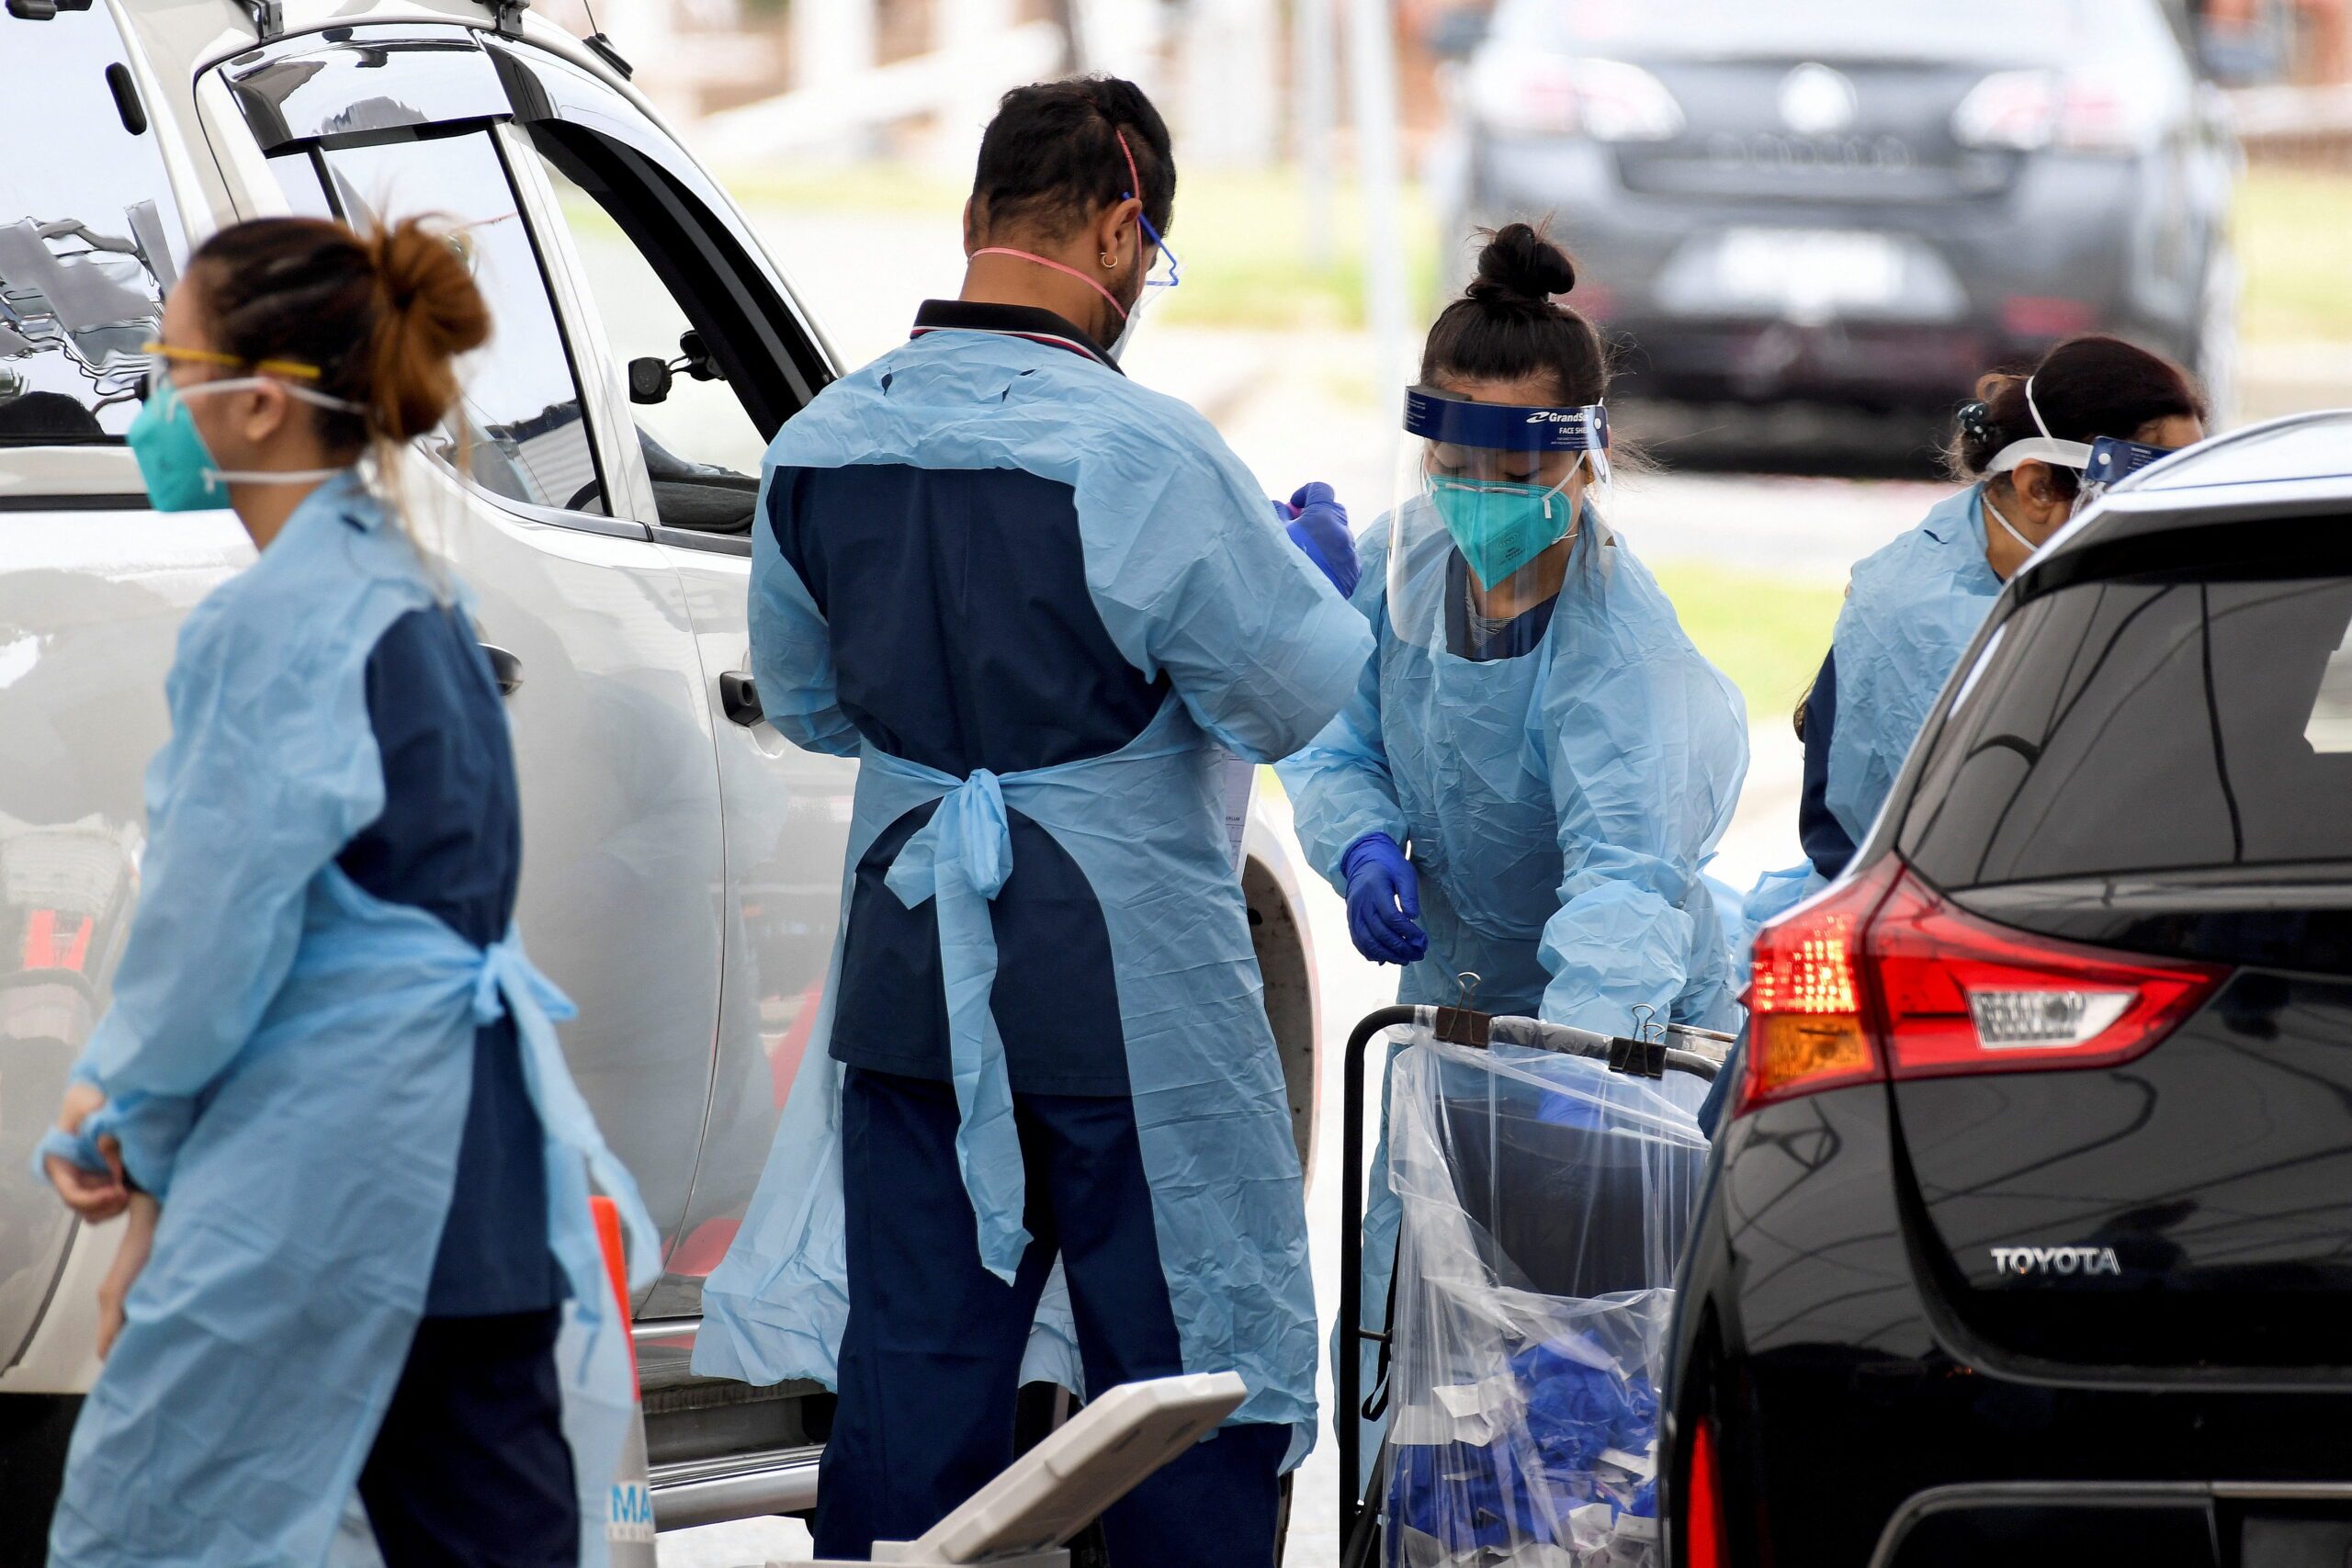 Australia says it is well prepared for mounting COVID-19 cases